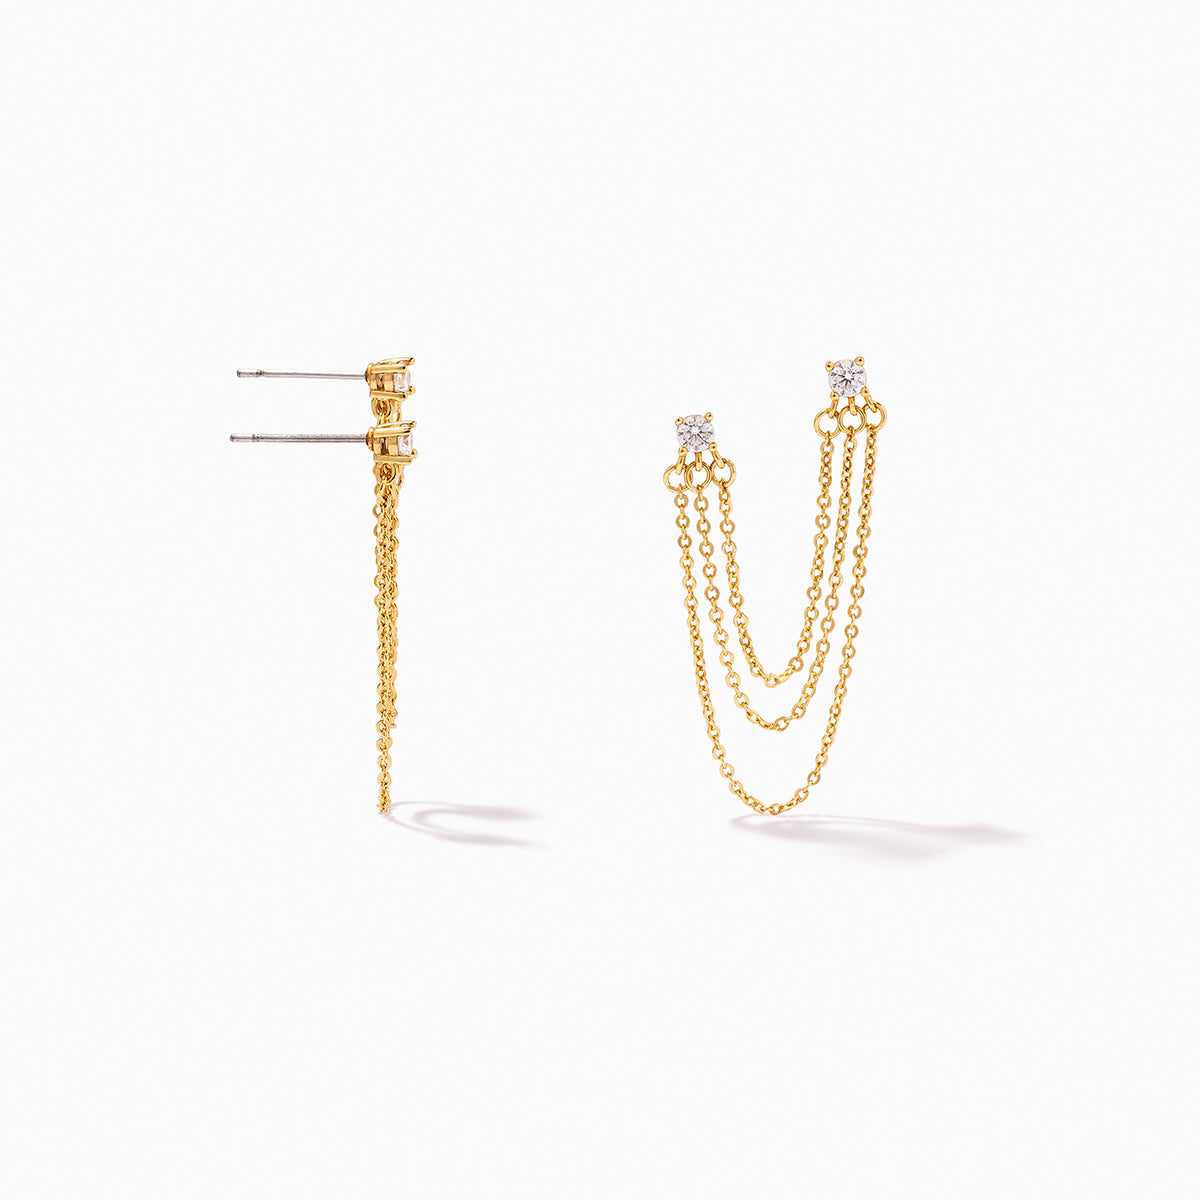 Triple Chain Ear Climber | Gold | Product Image | Uncommon James